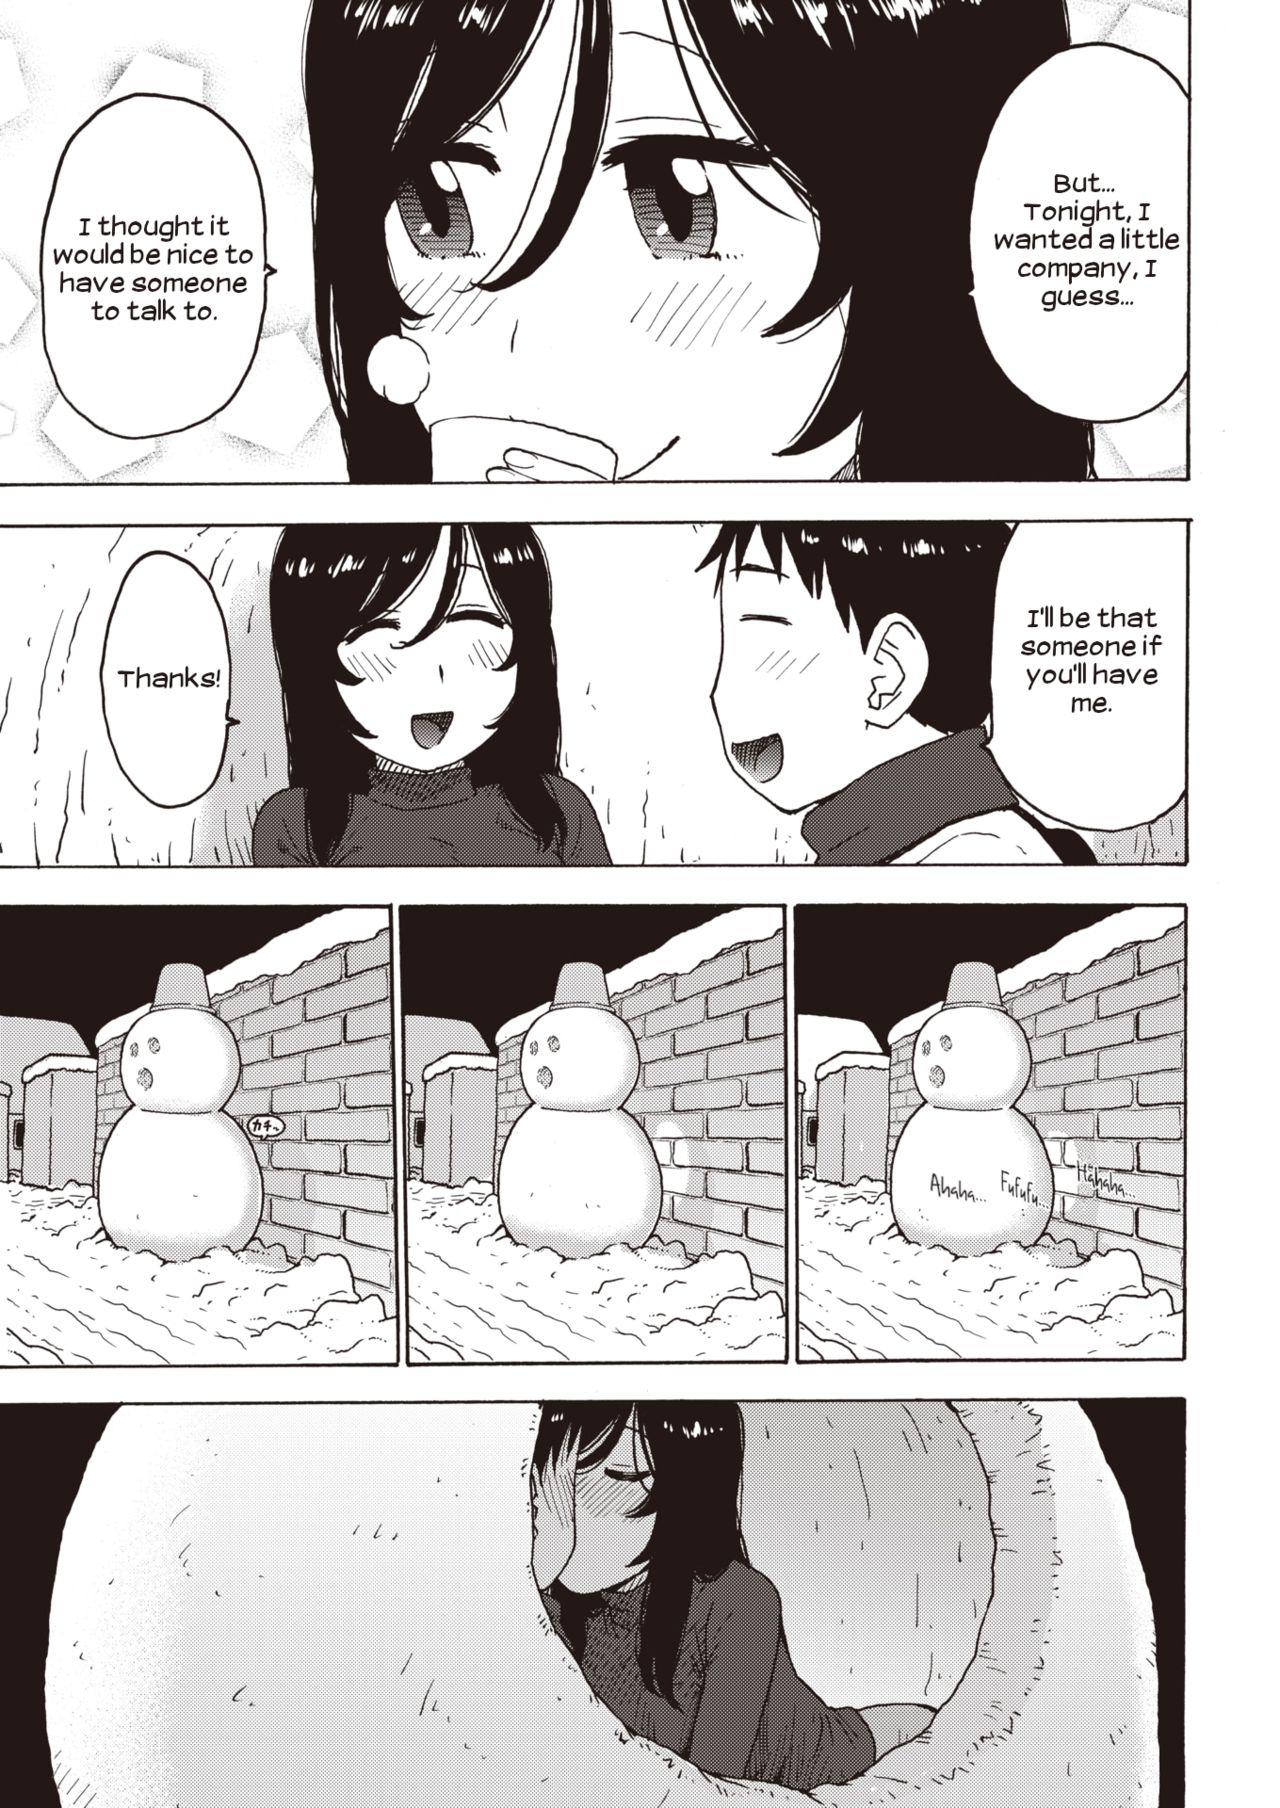 Gay Bukkakeboys Good Evening from inside the Snow - Original Hot Naked Girl - Page 7